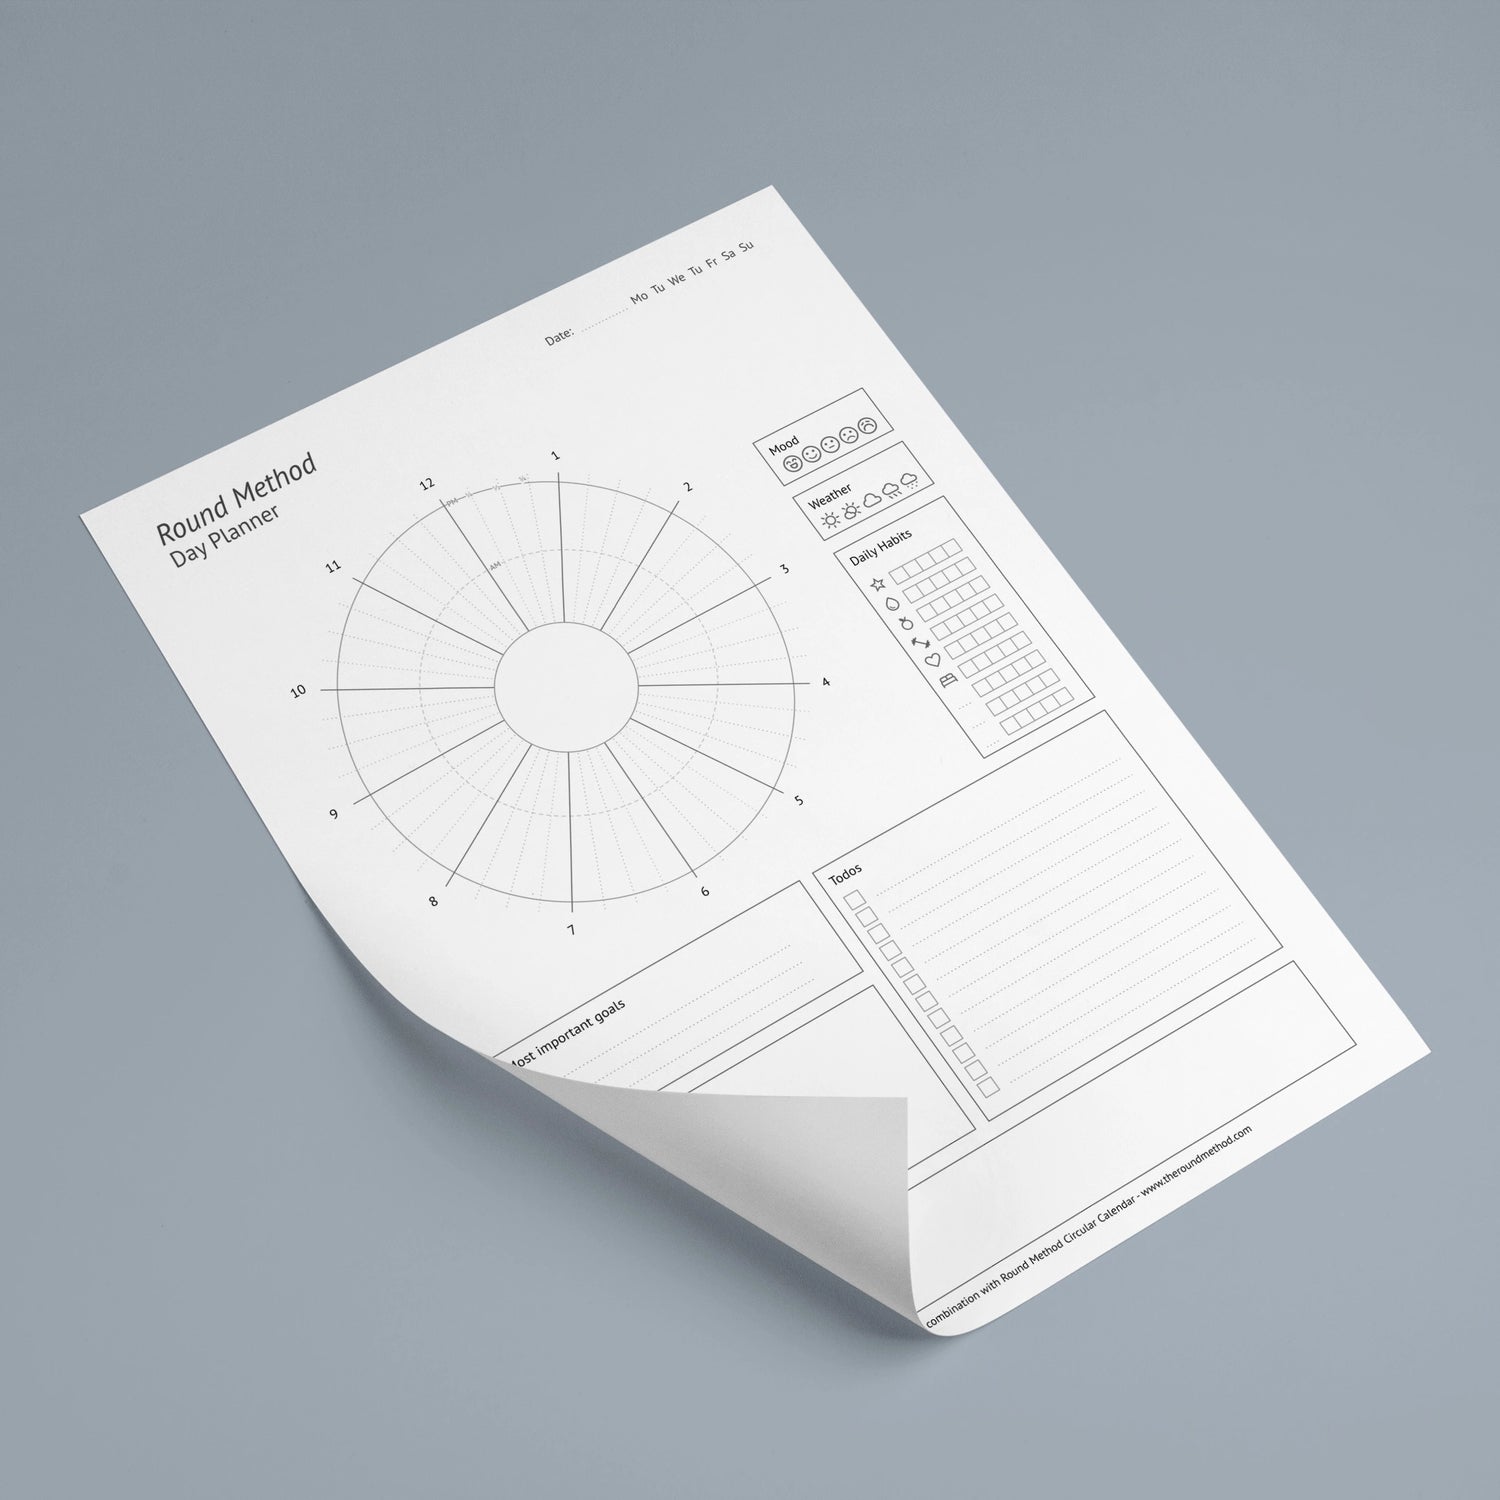 Picture of free printable daily planner in A4 or letter Format to fill out, track your progress and reach your goals